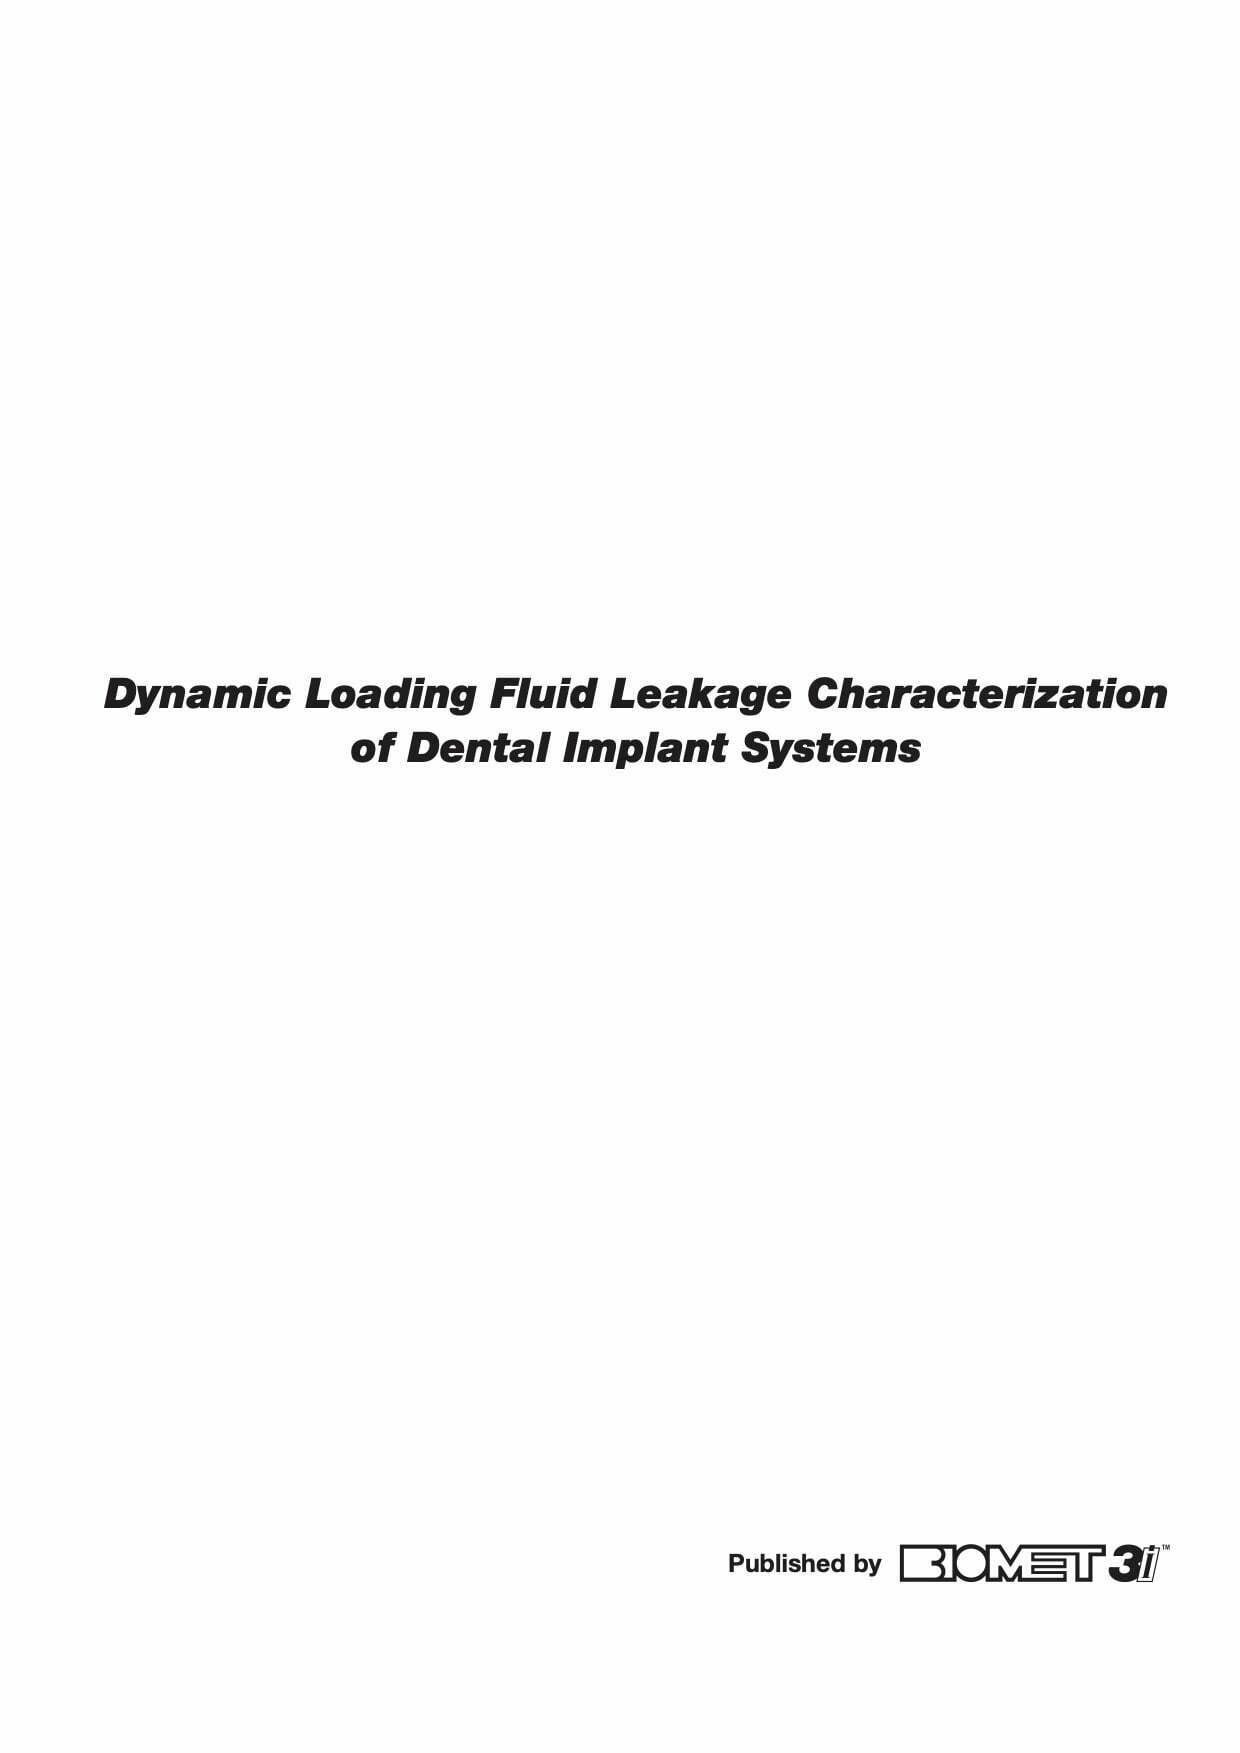 Dynamic Loading Fluid Leakage Characterization of Dental Implant Systems